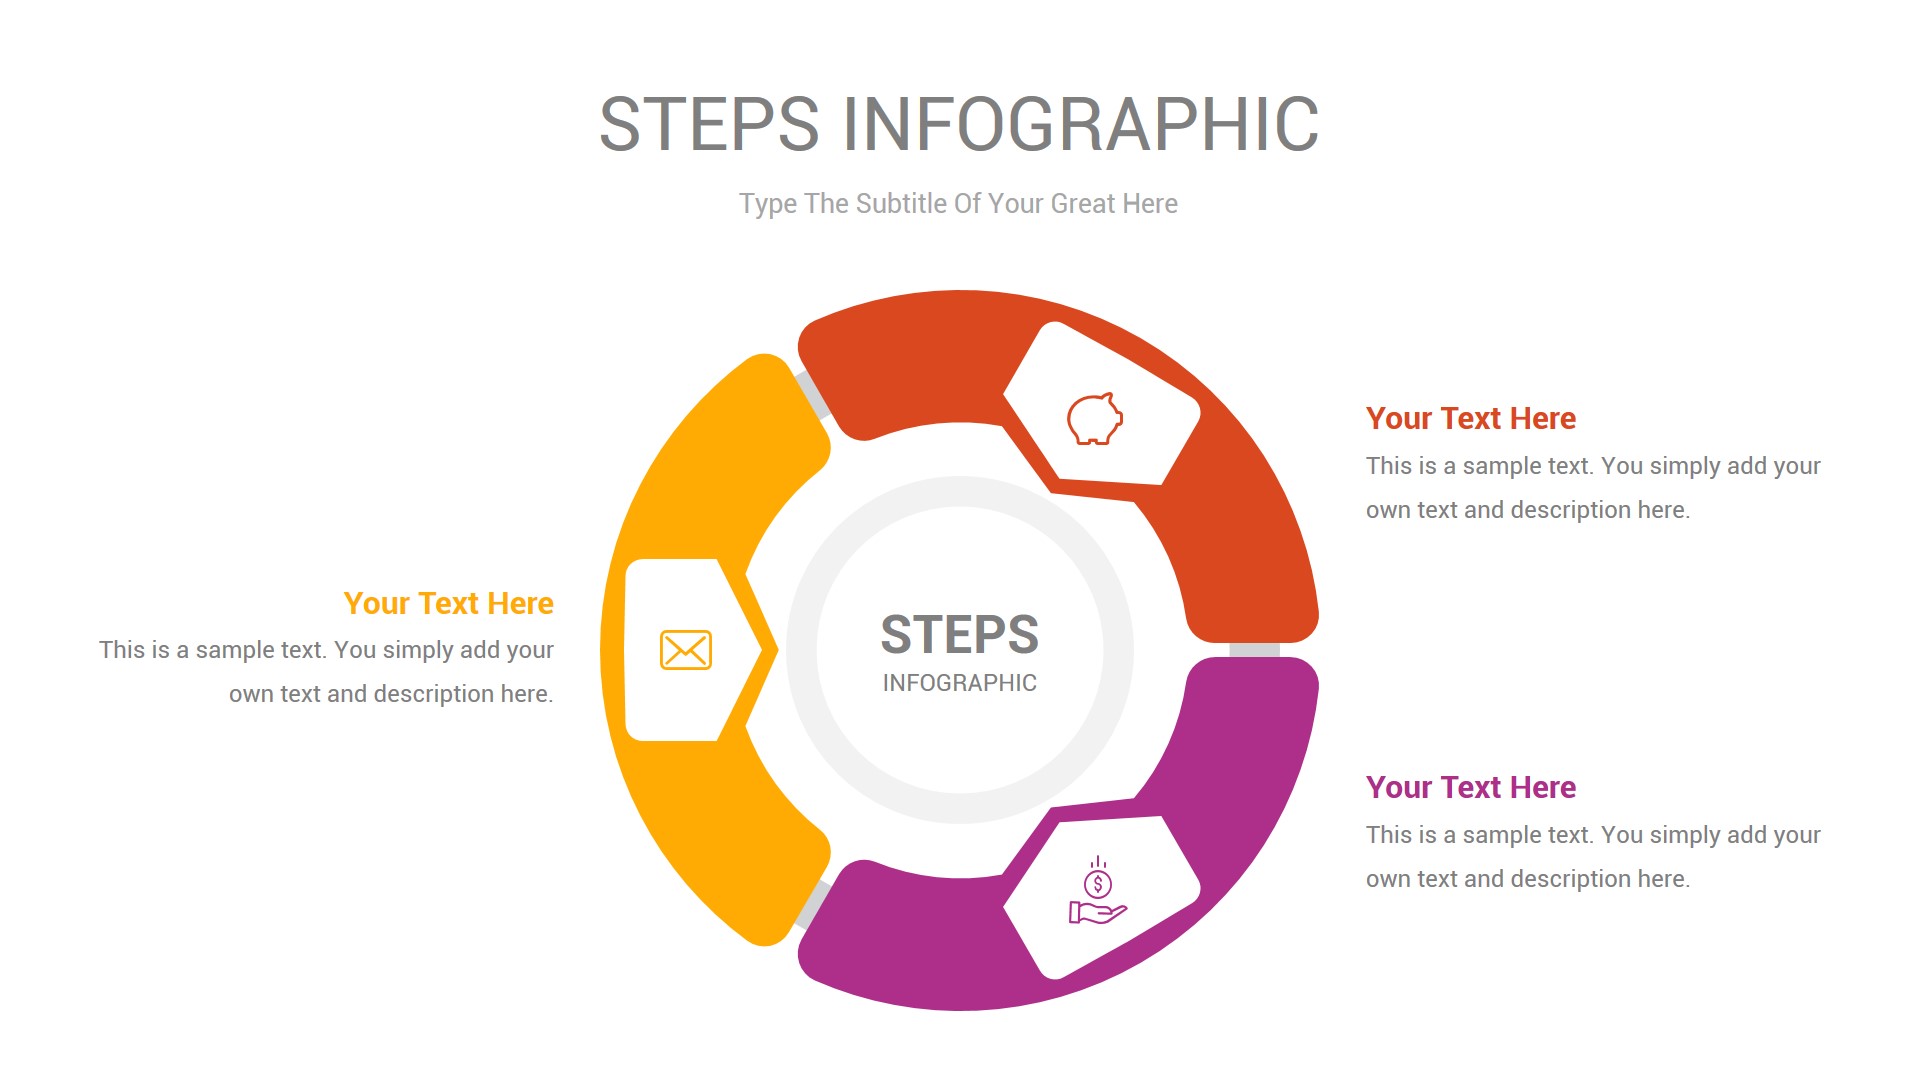 Steps Infographic PowerPoint Template by Neroox | GraphicRiver